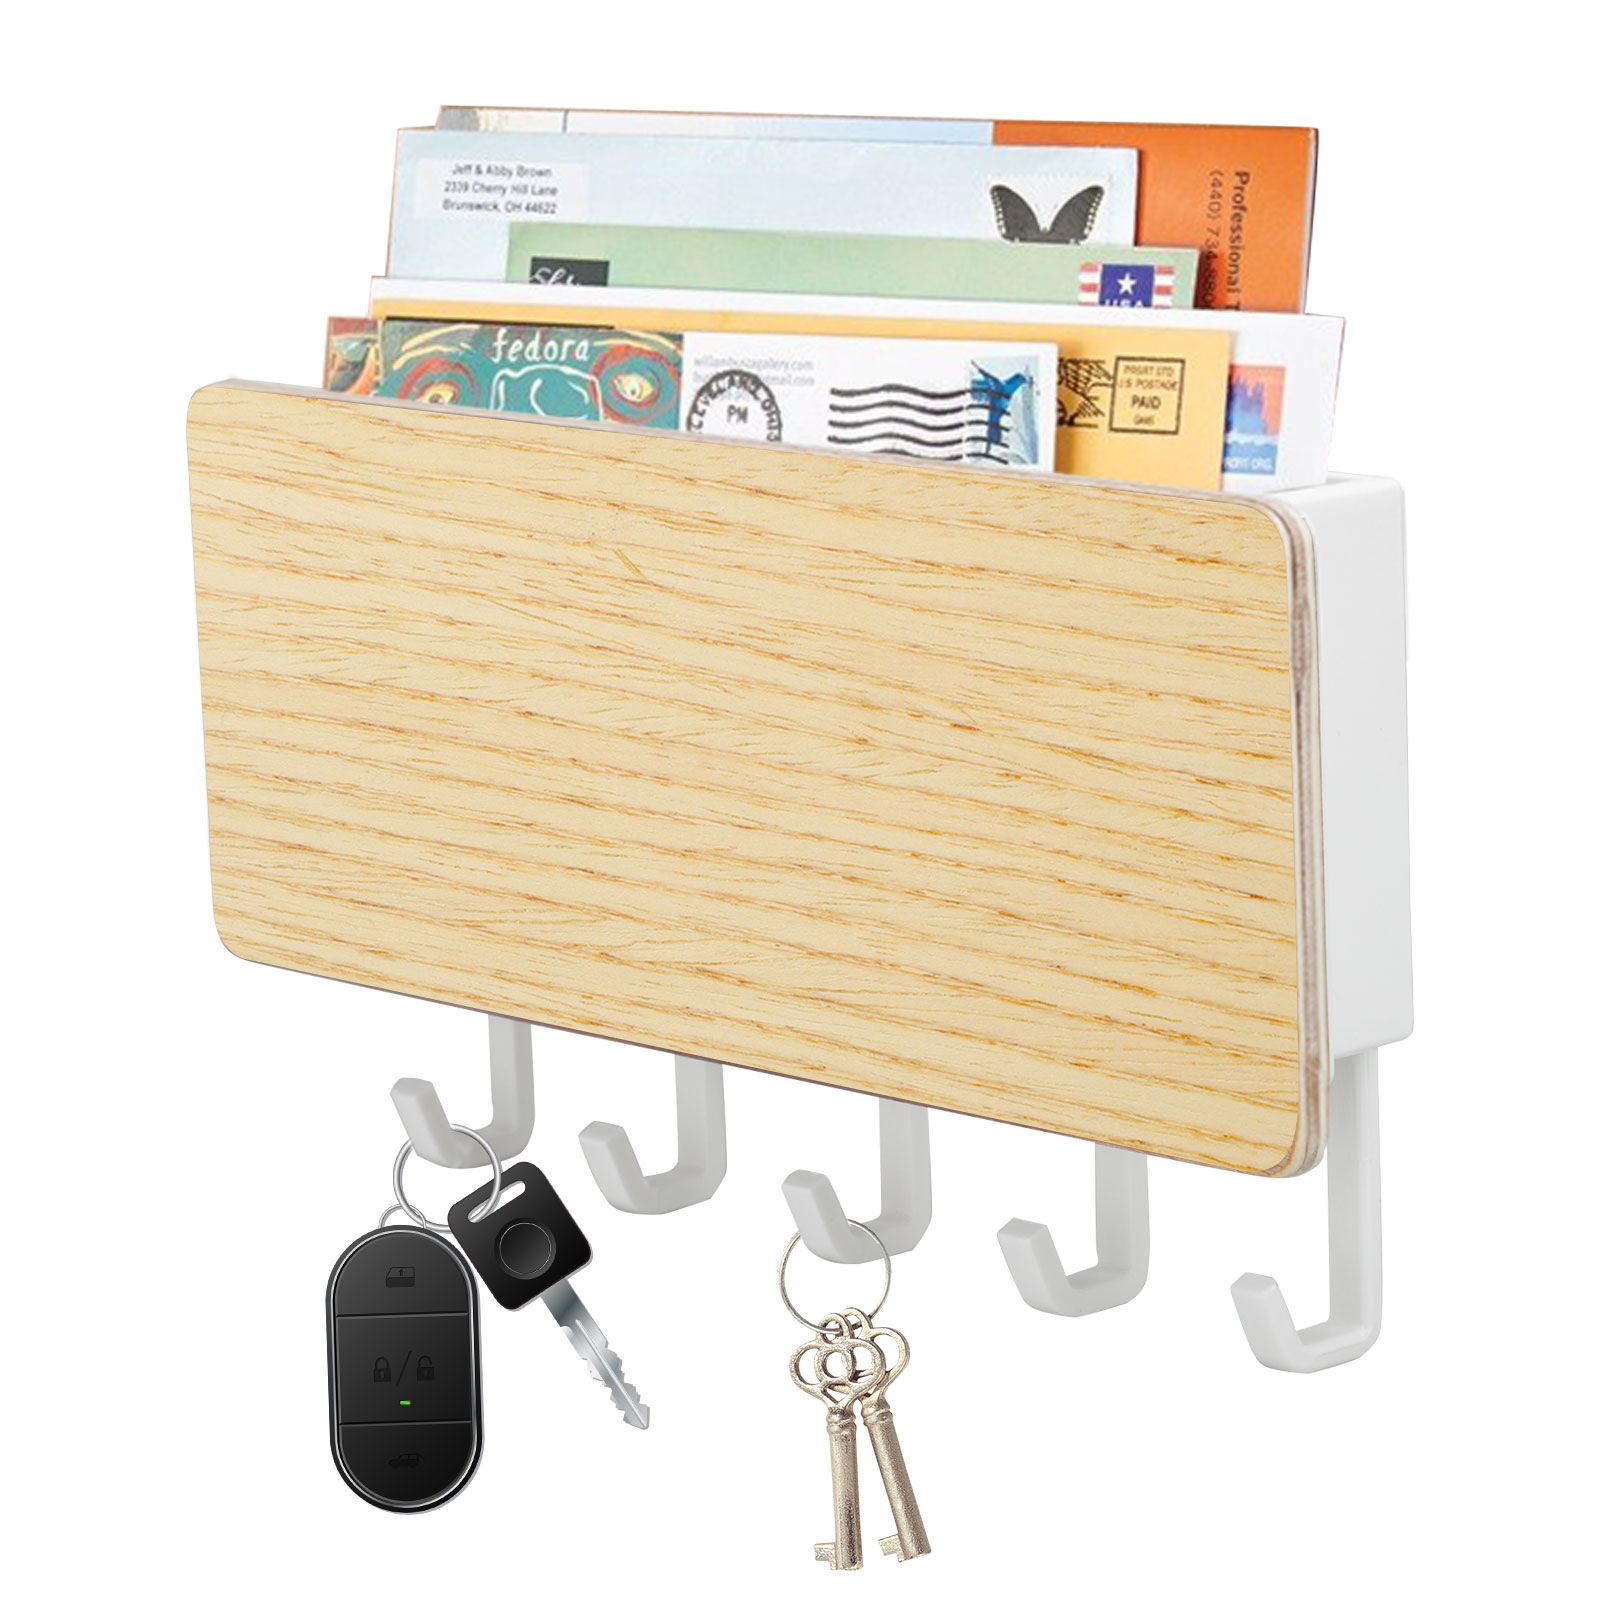 Mail and Key Holder Entryway Wall Mounted Key Organizer Rack Letter Sorter KP 